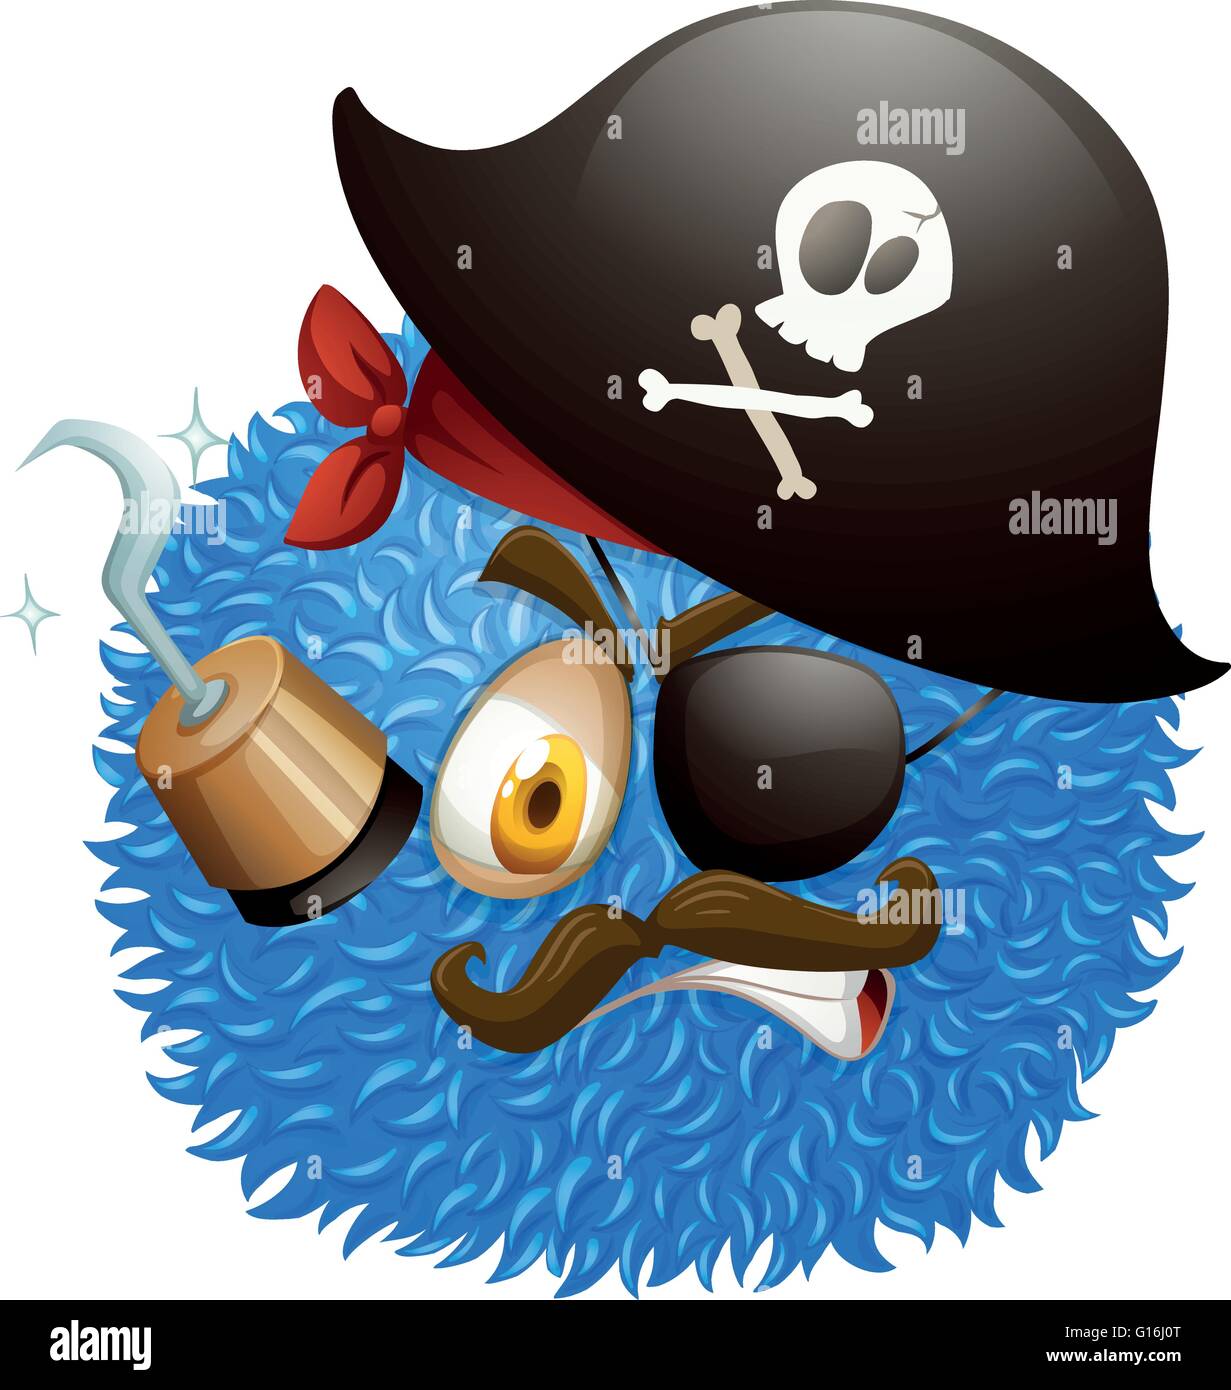 Pirate face on fluffy ball illustration Stock Vector